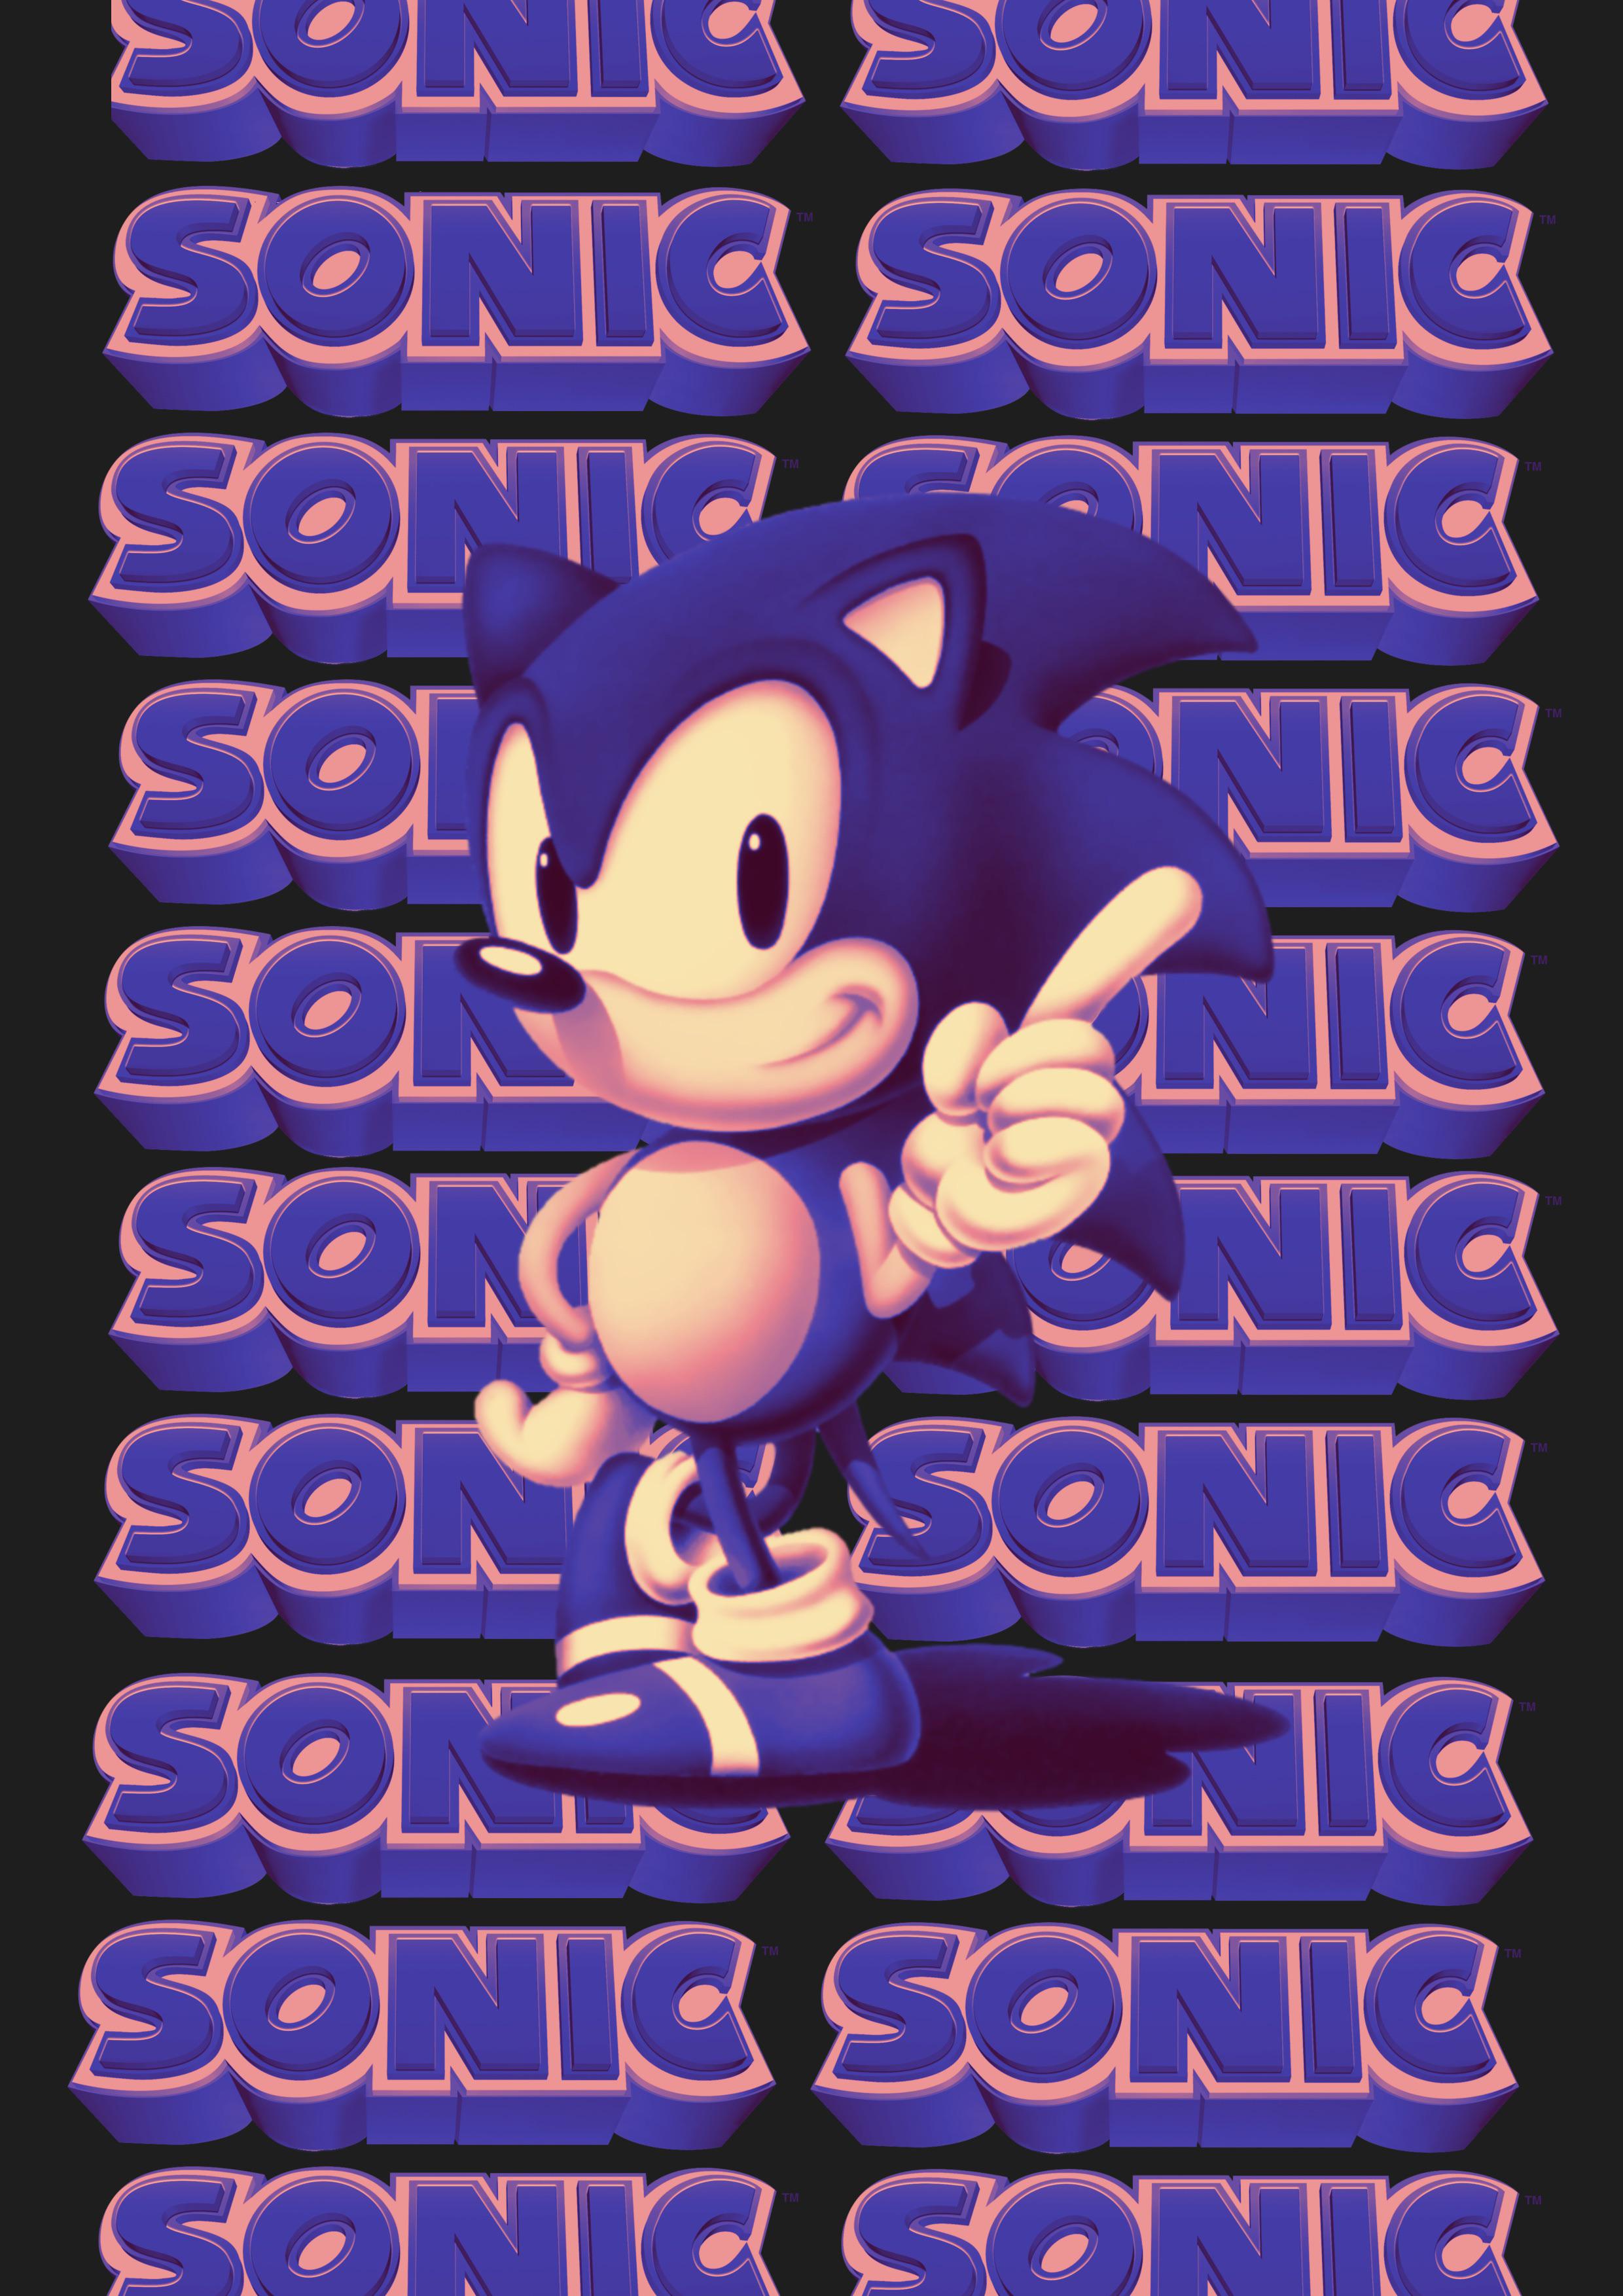 Sonic the Hedgehog wallpaper with Sonic pointing at the camera - Sonic